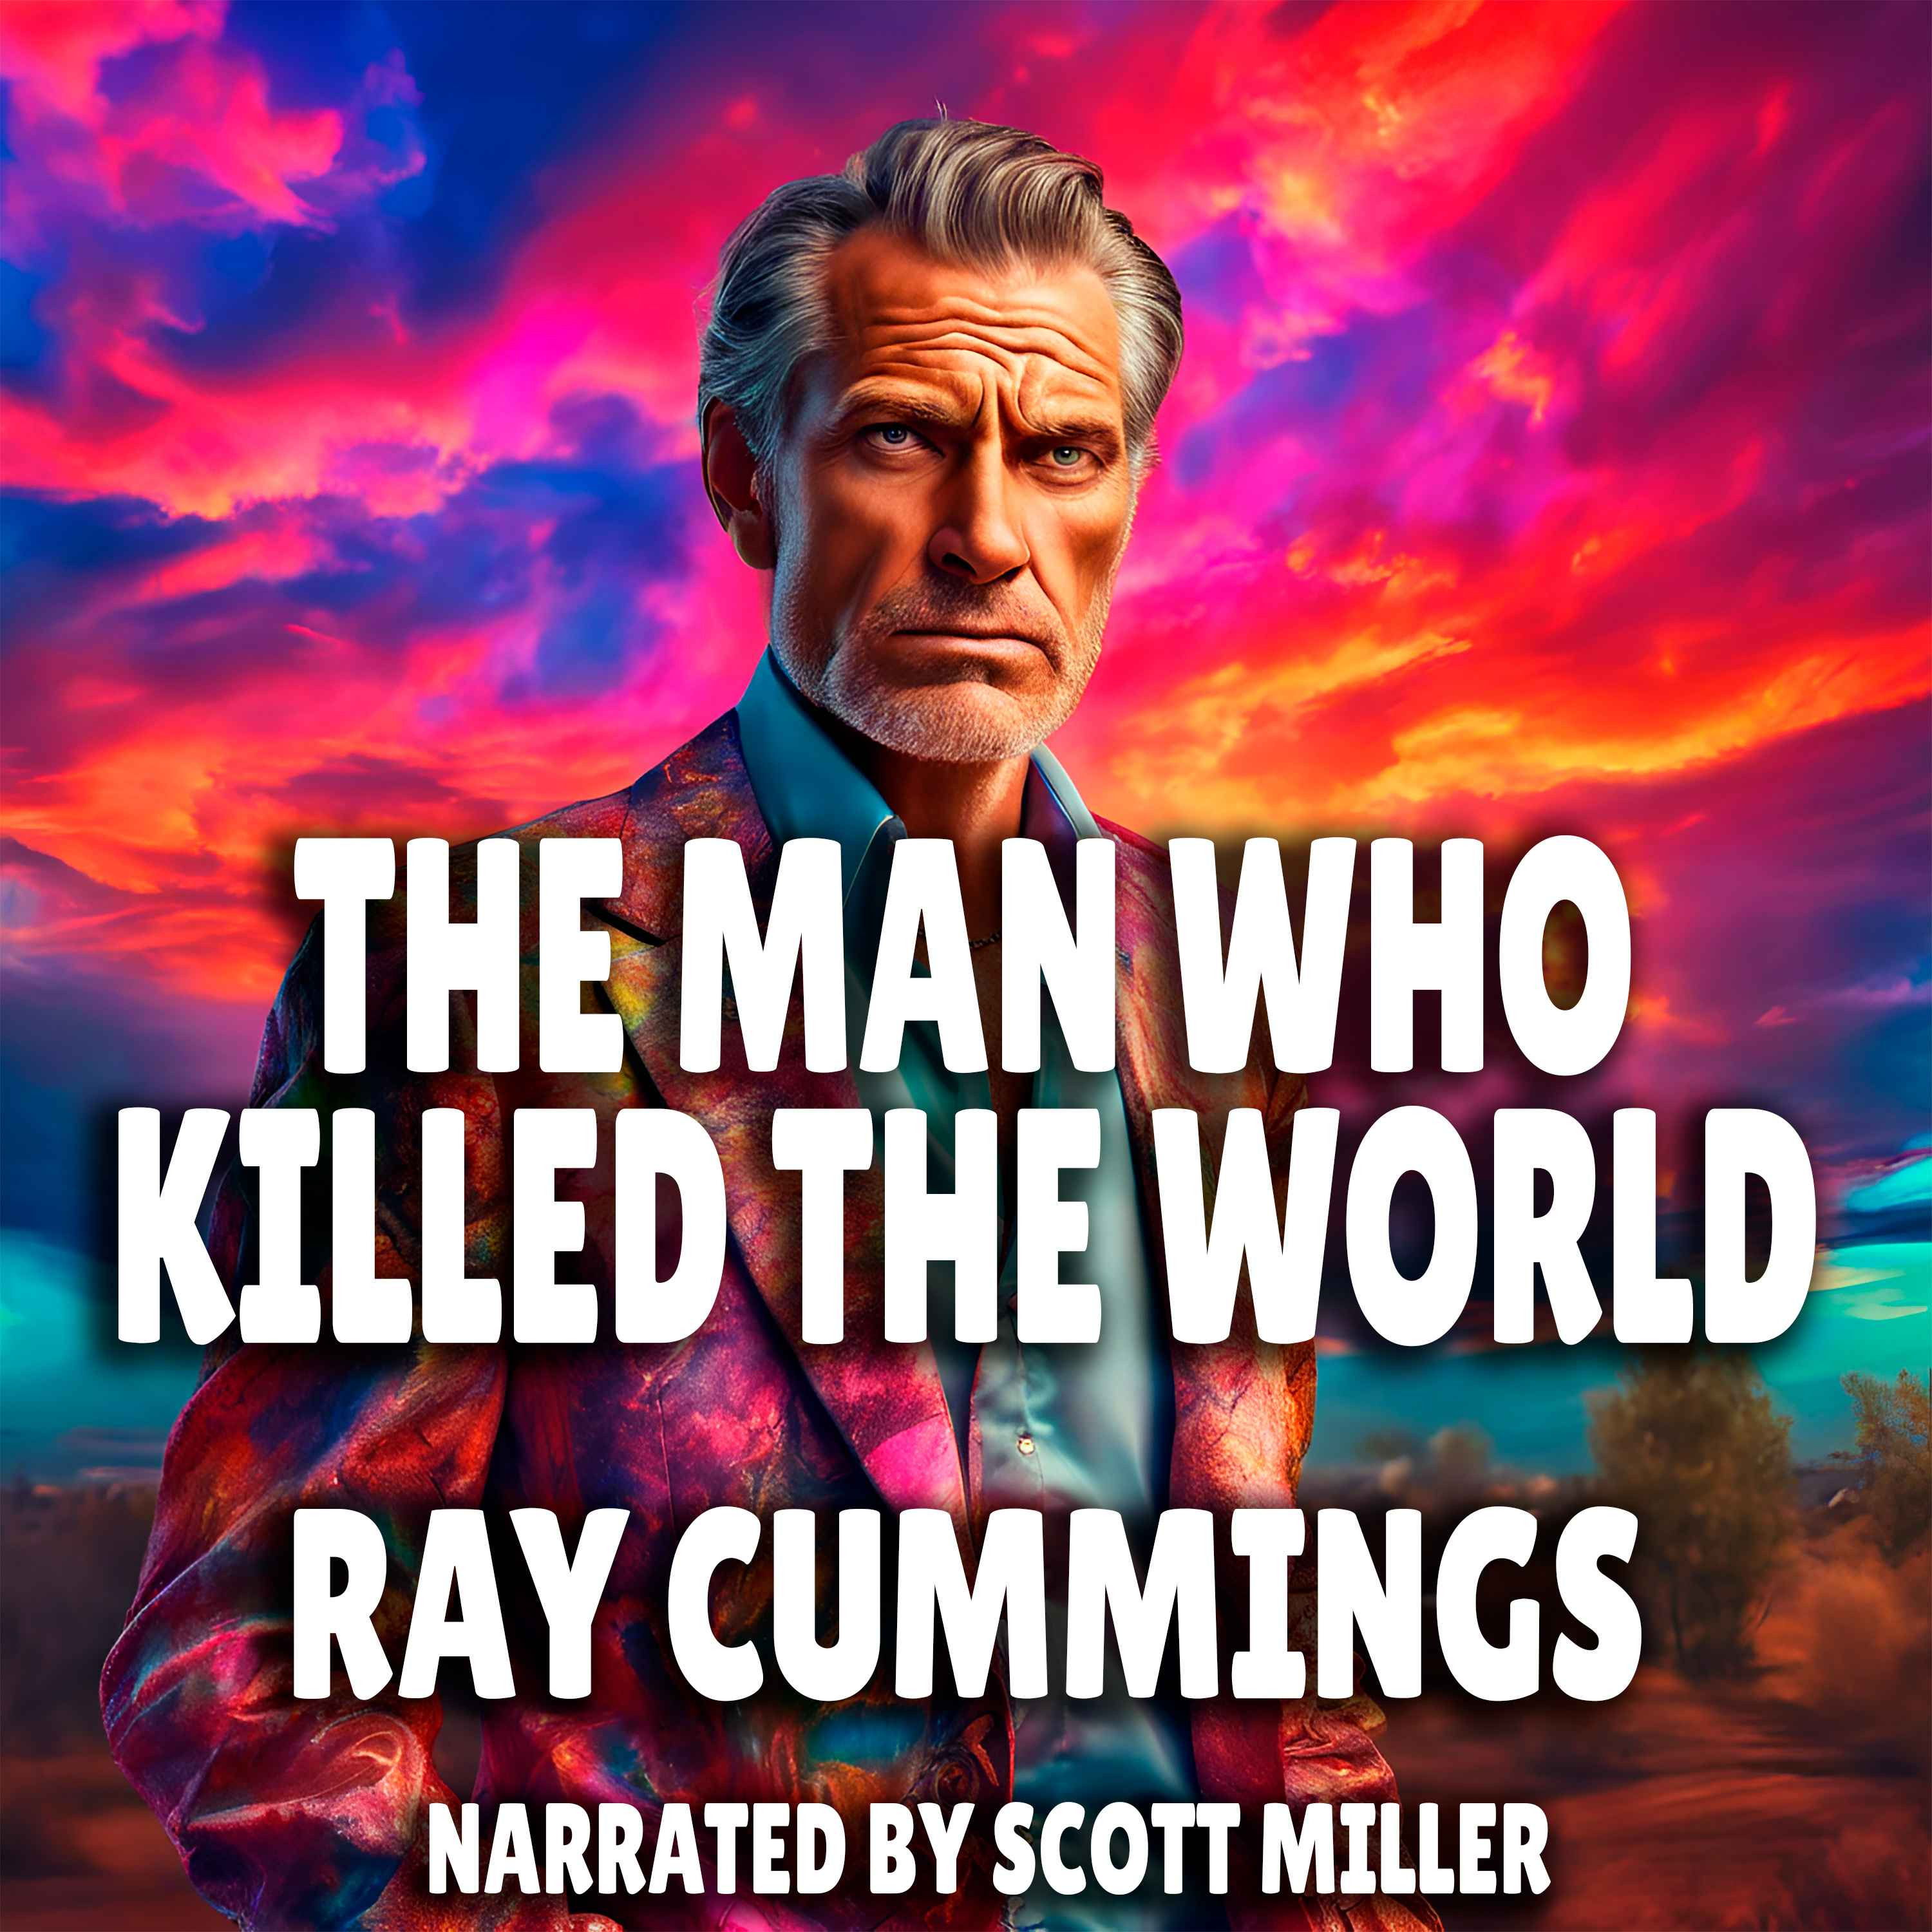 The Man Who Killed the World by Ray Cummings - Short Science Fiction Story From the 1940s